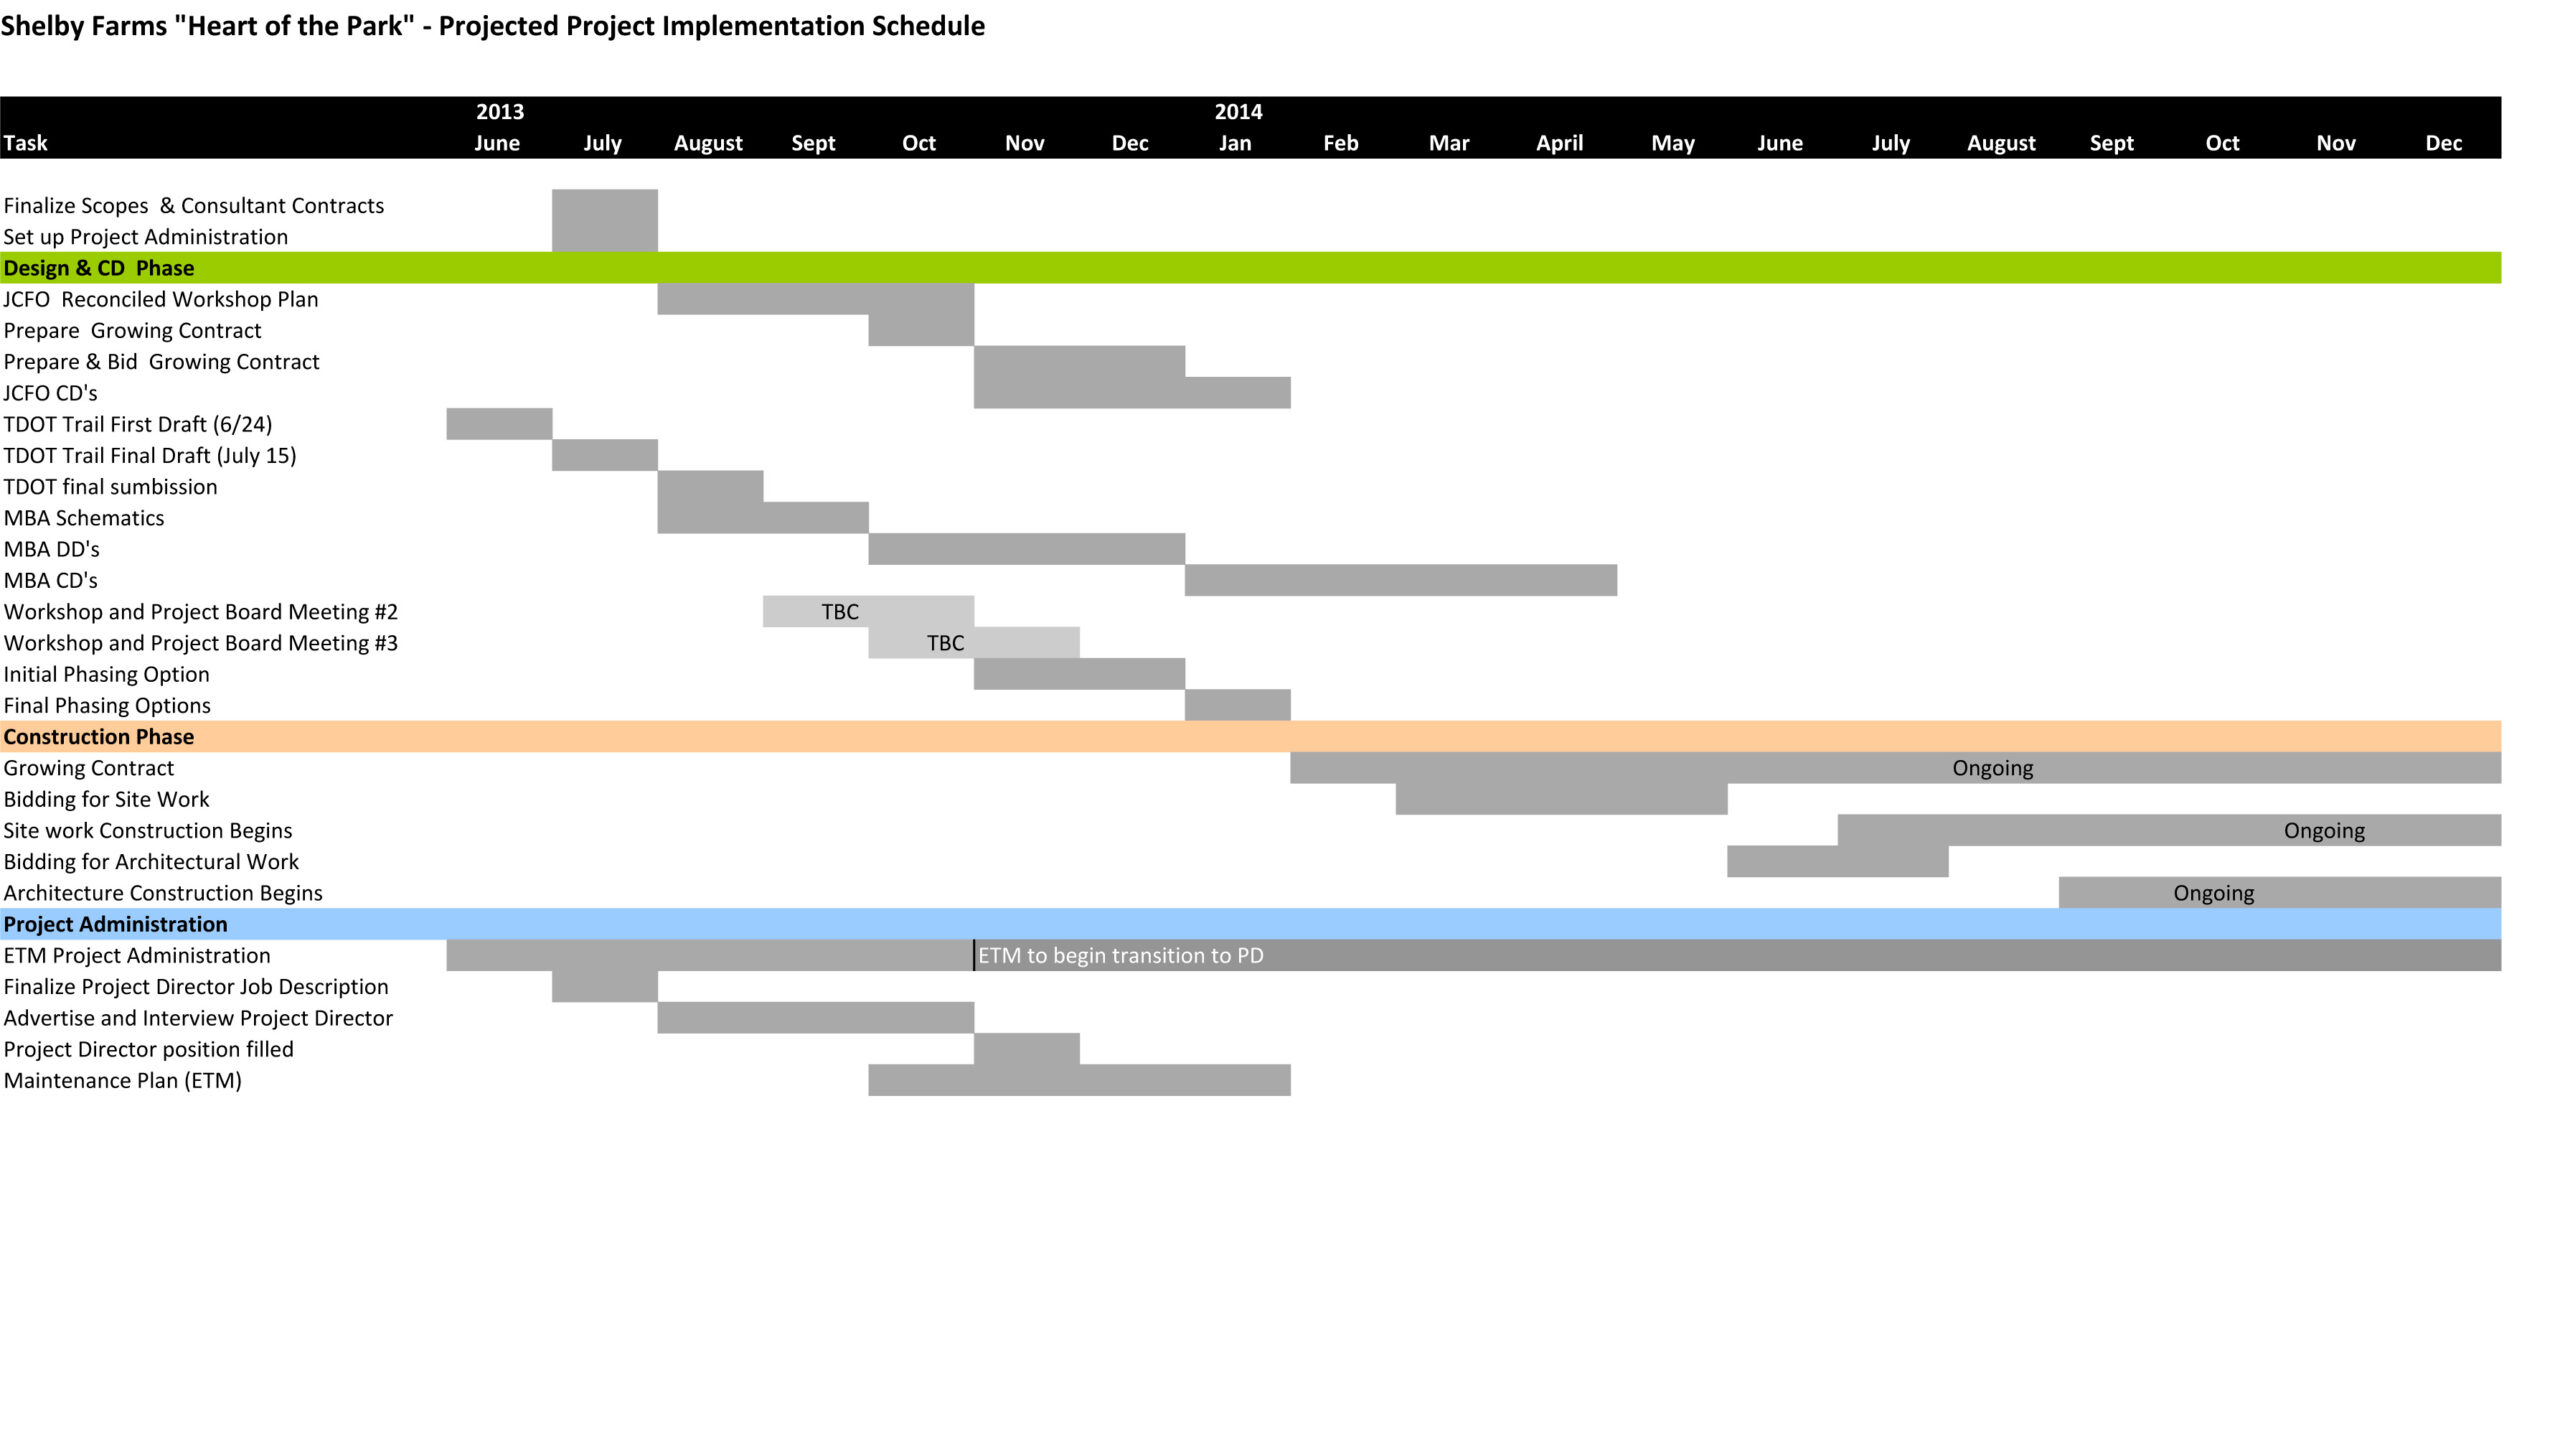 Color-coded chart for each phase of the project implementation schedule.